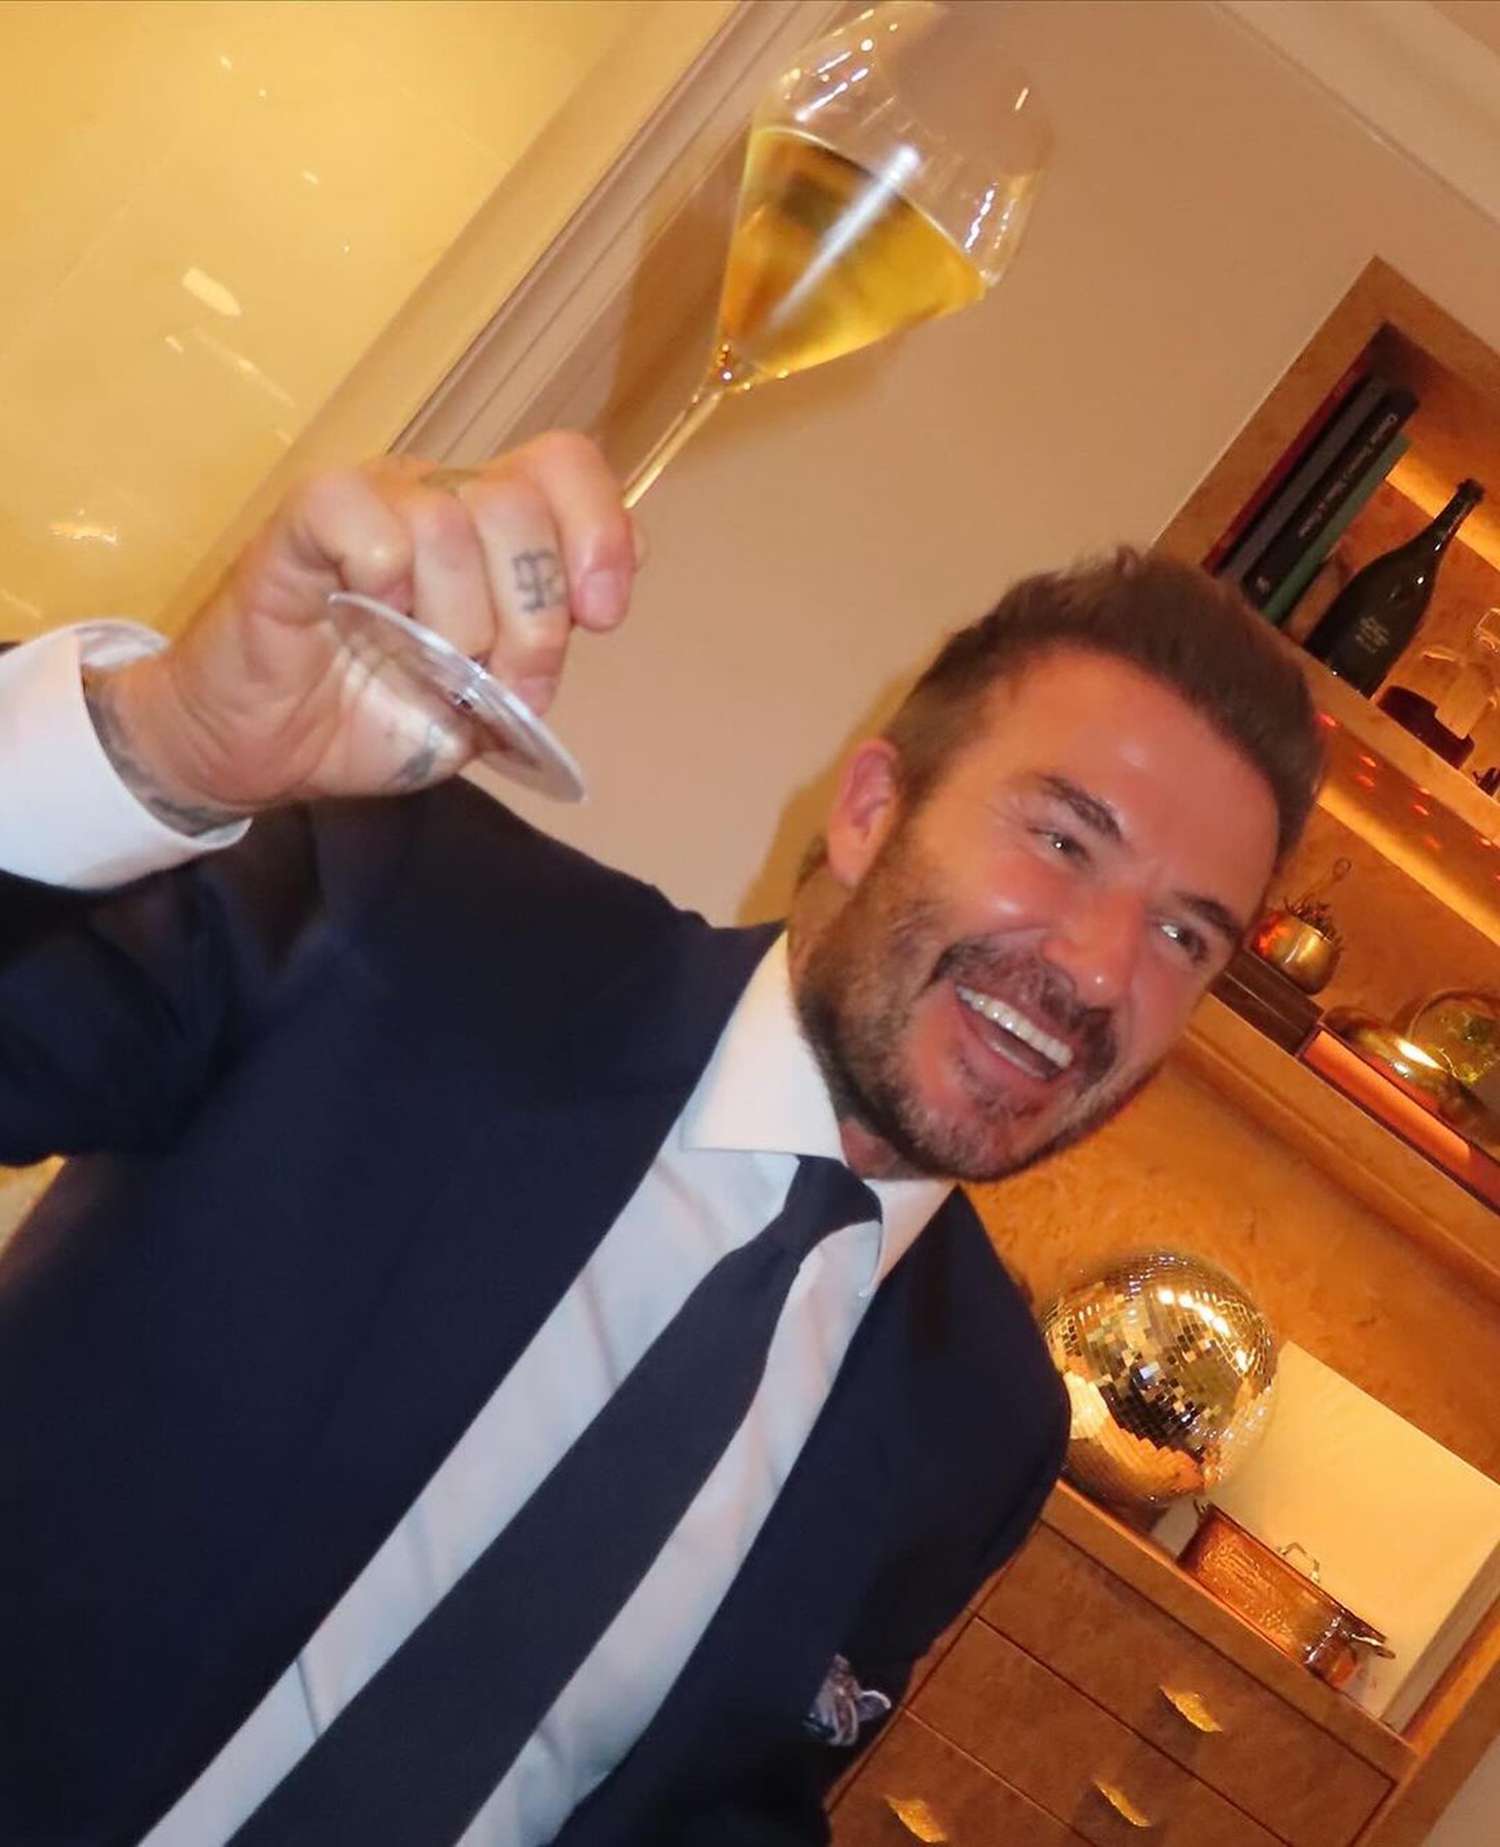 David Beckham Shares Behind the Scenes Look at New Year's Eve Celebrations with Wife Victoria